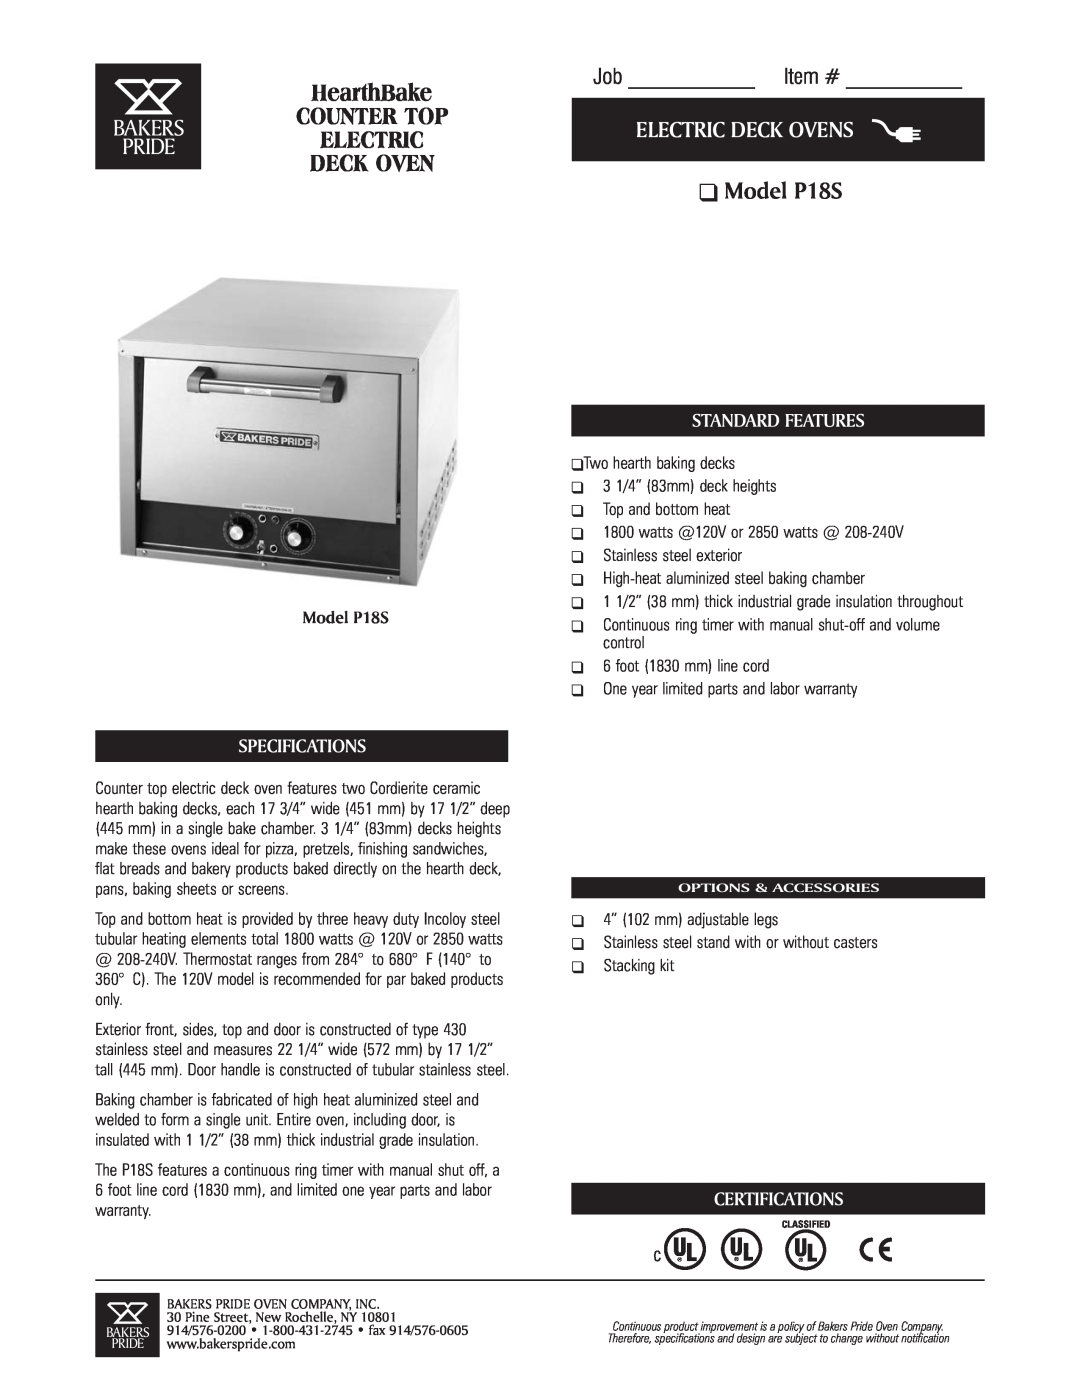 Bakers Pride Oven specifications HearthBake, Model P18S, Electric Deck Ovens, Job Item #, Counter Top, Specifications 